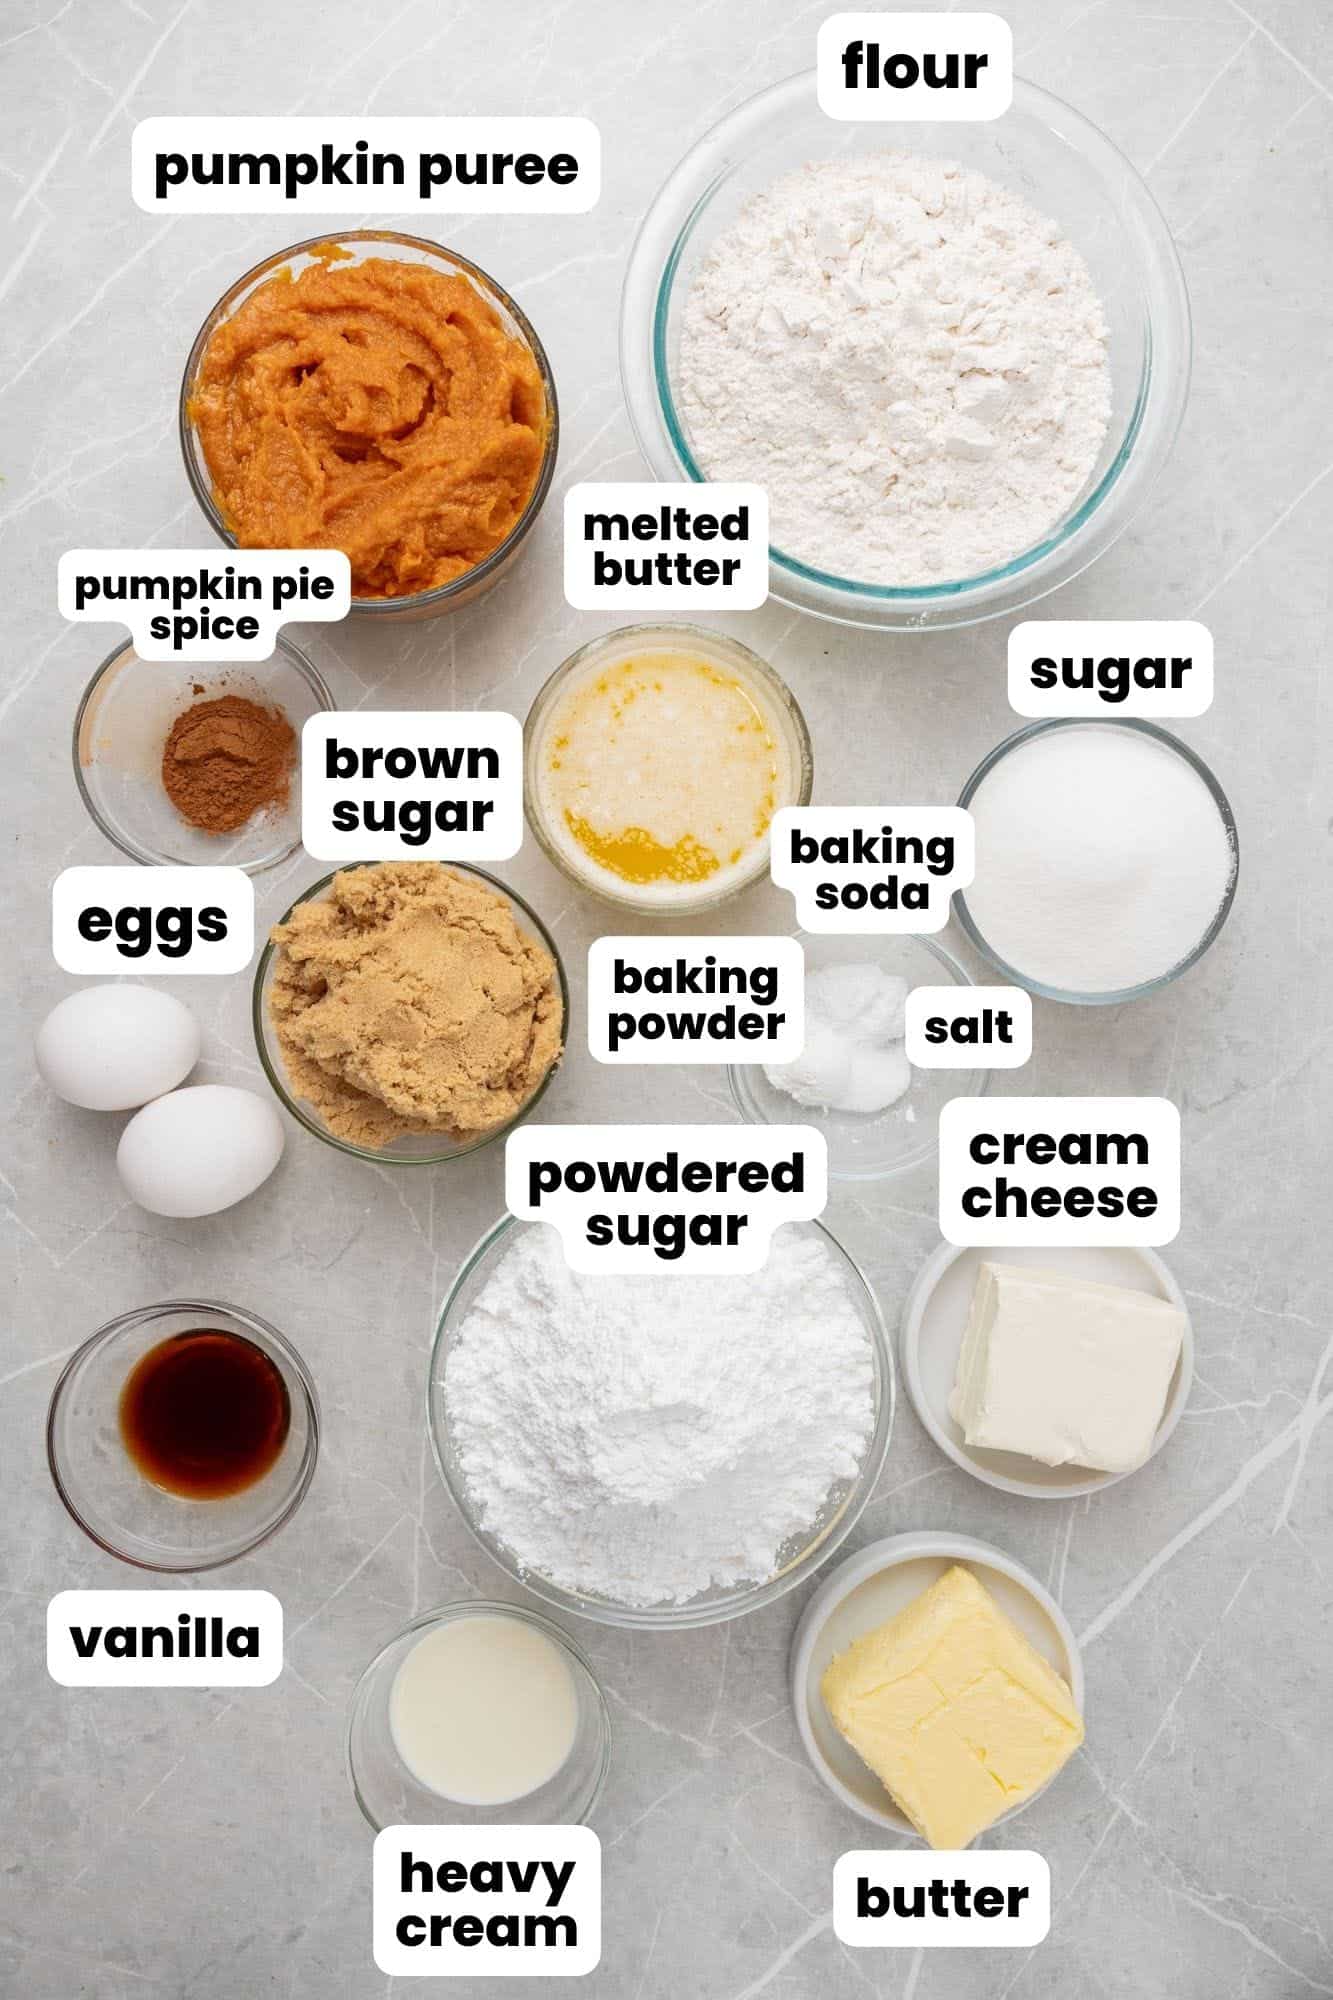 The ingredients needed to make pumpkin whoopie pies with cream cheese frosting